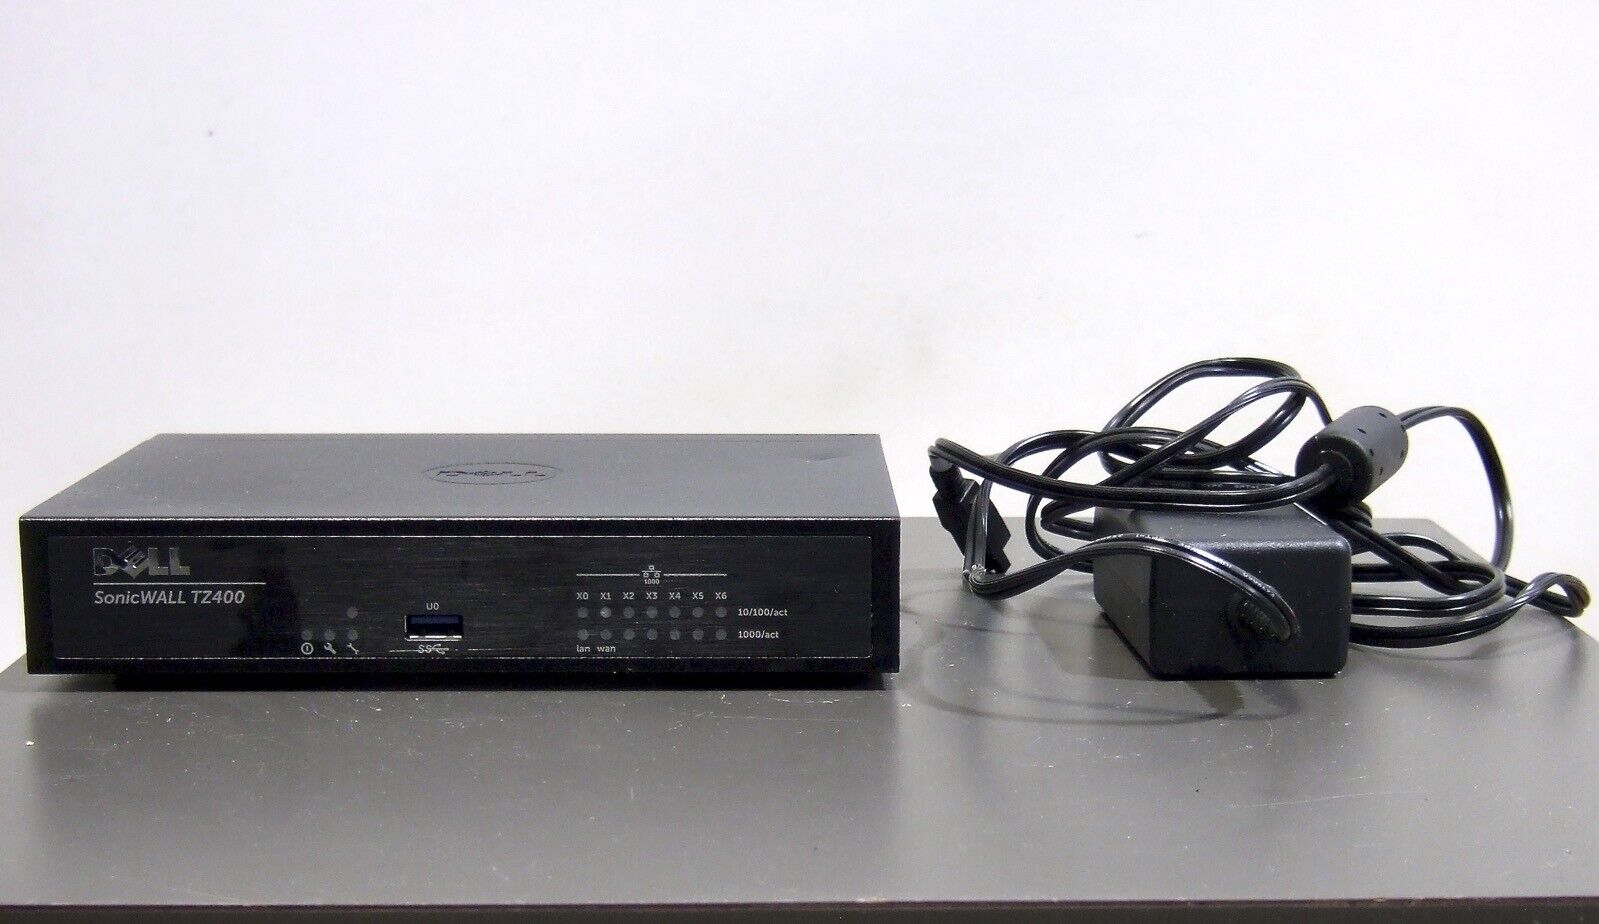 Dell SonicWALL TZ400 Network Security Appliance